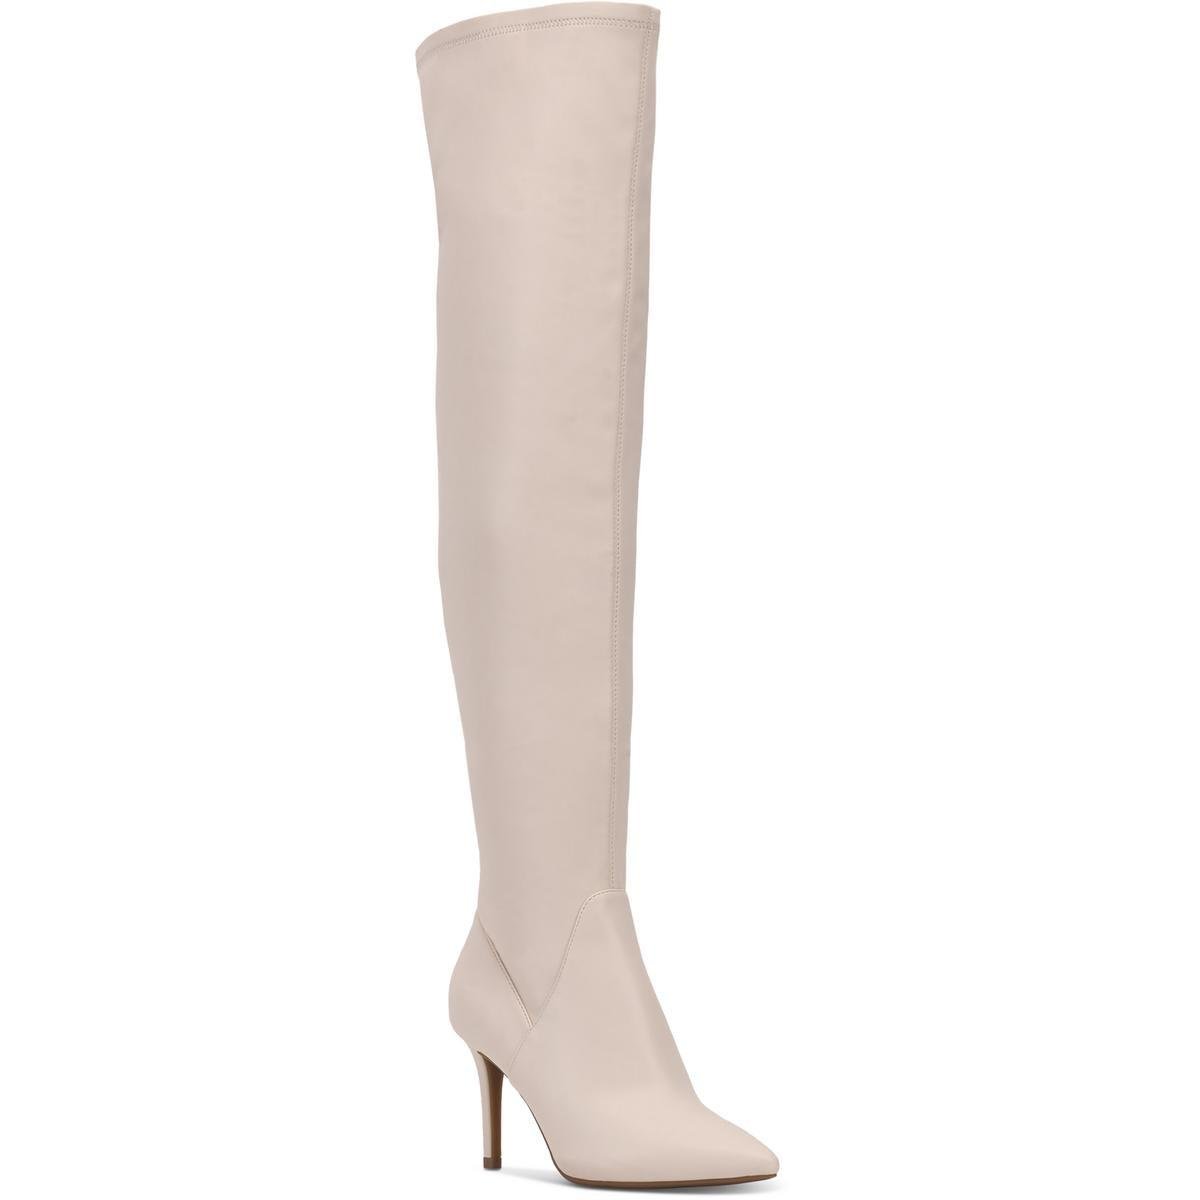 Jessica Simpson Womens Abrine Over-The-Knee Boots by JESSICA SIMPSON